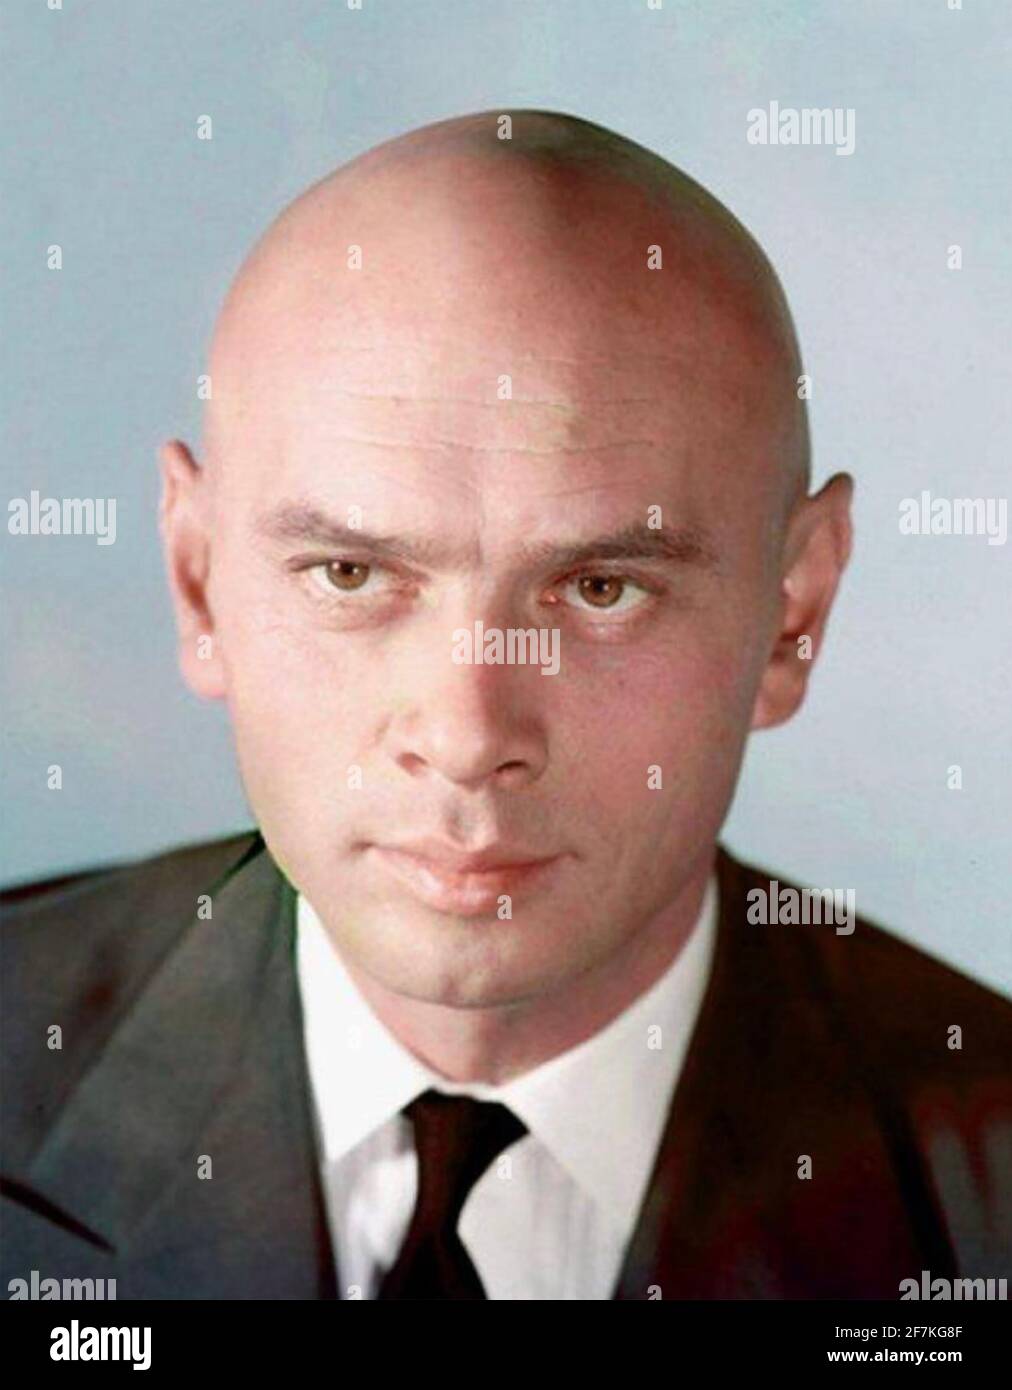 YUL BRYNNER (1920-1985) Russian-American film actor about 1970 Stock Photo